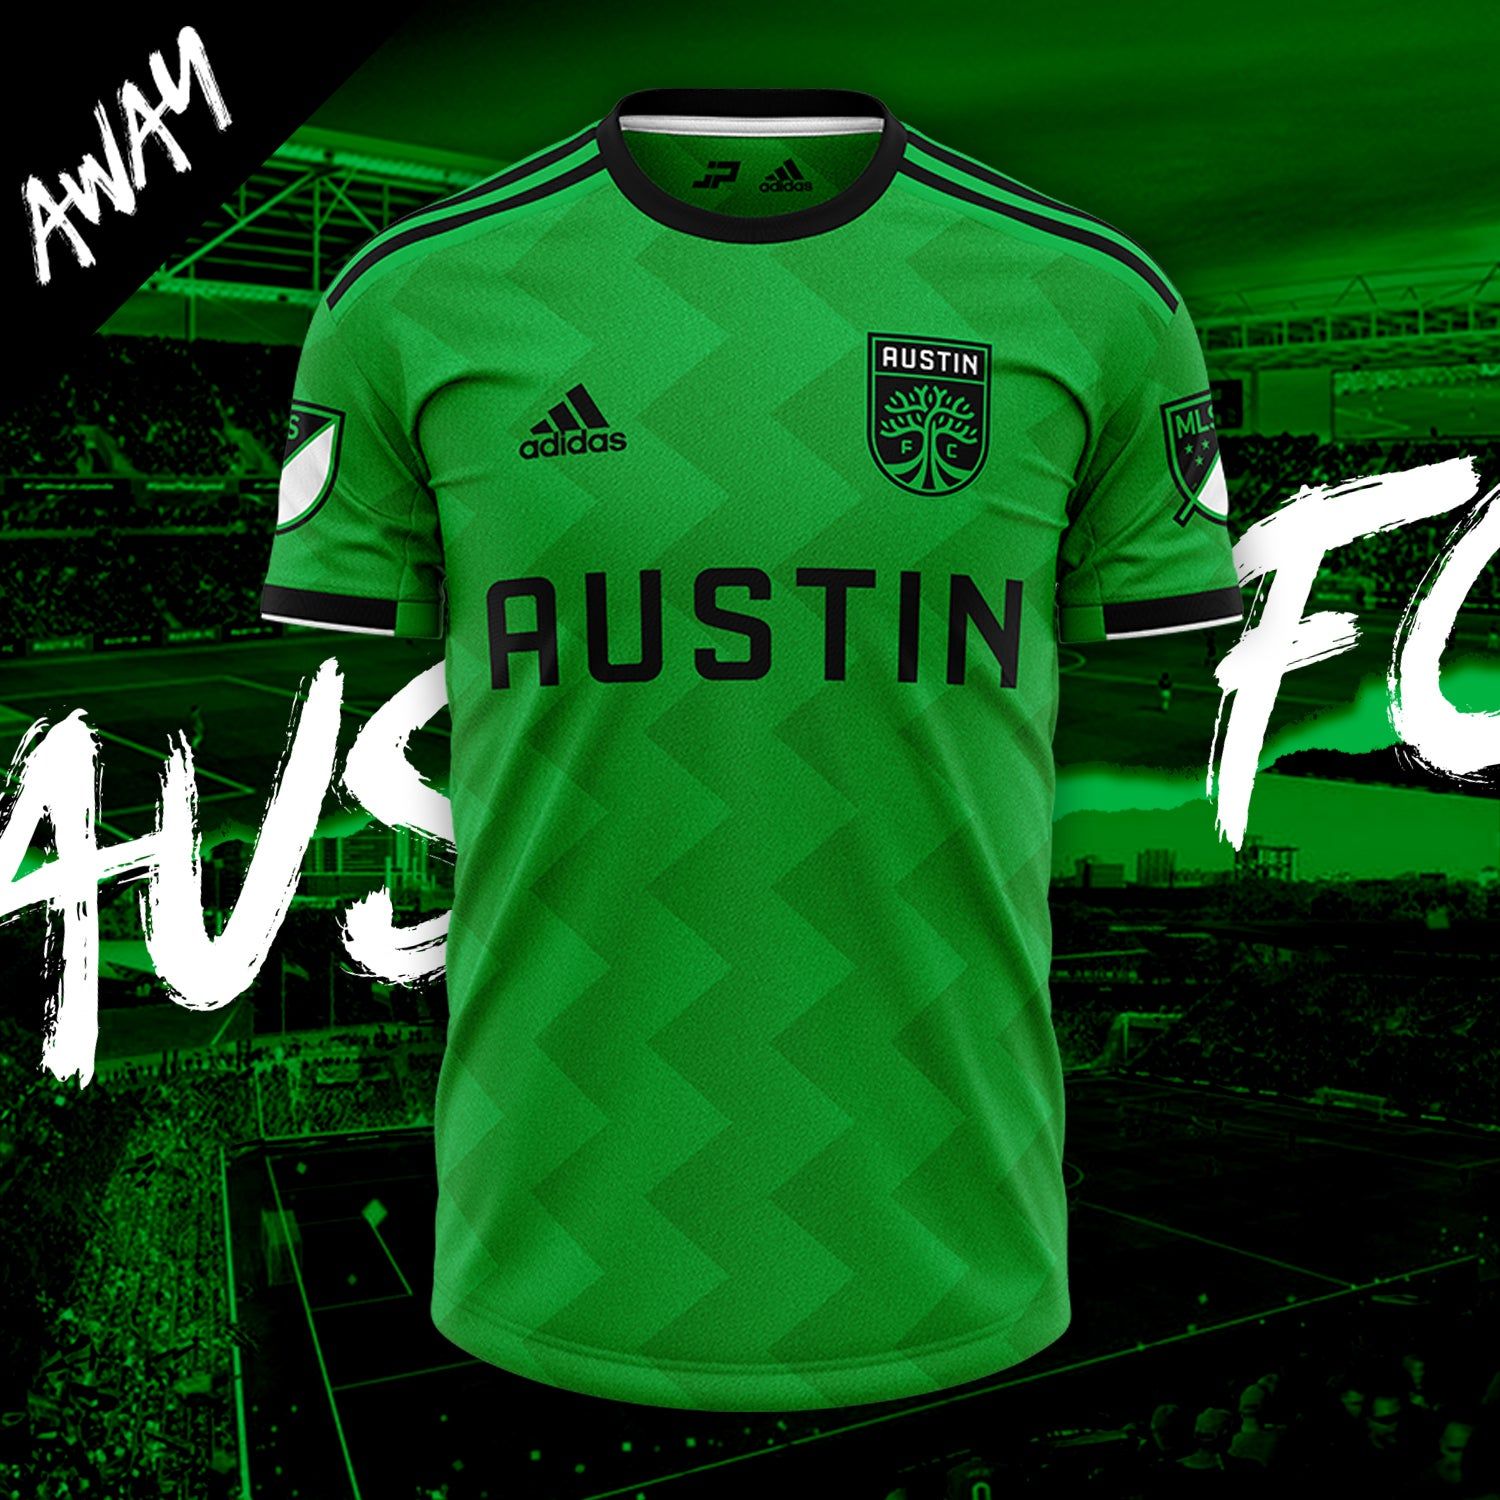 Best R Austinfc Image On Pholder. It's Official. Vote Yes On Prop A For A Train Station At Austin FC